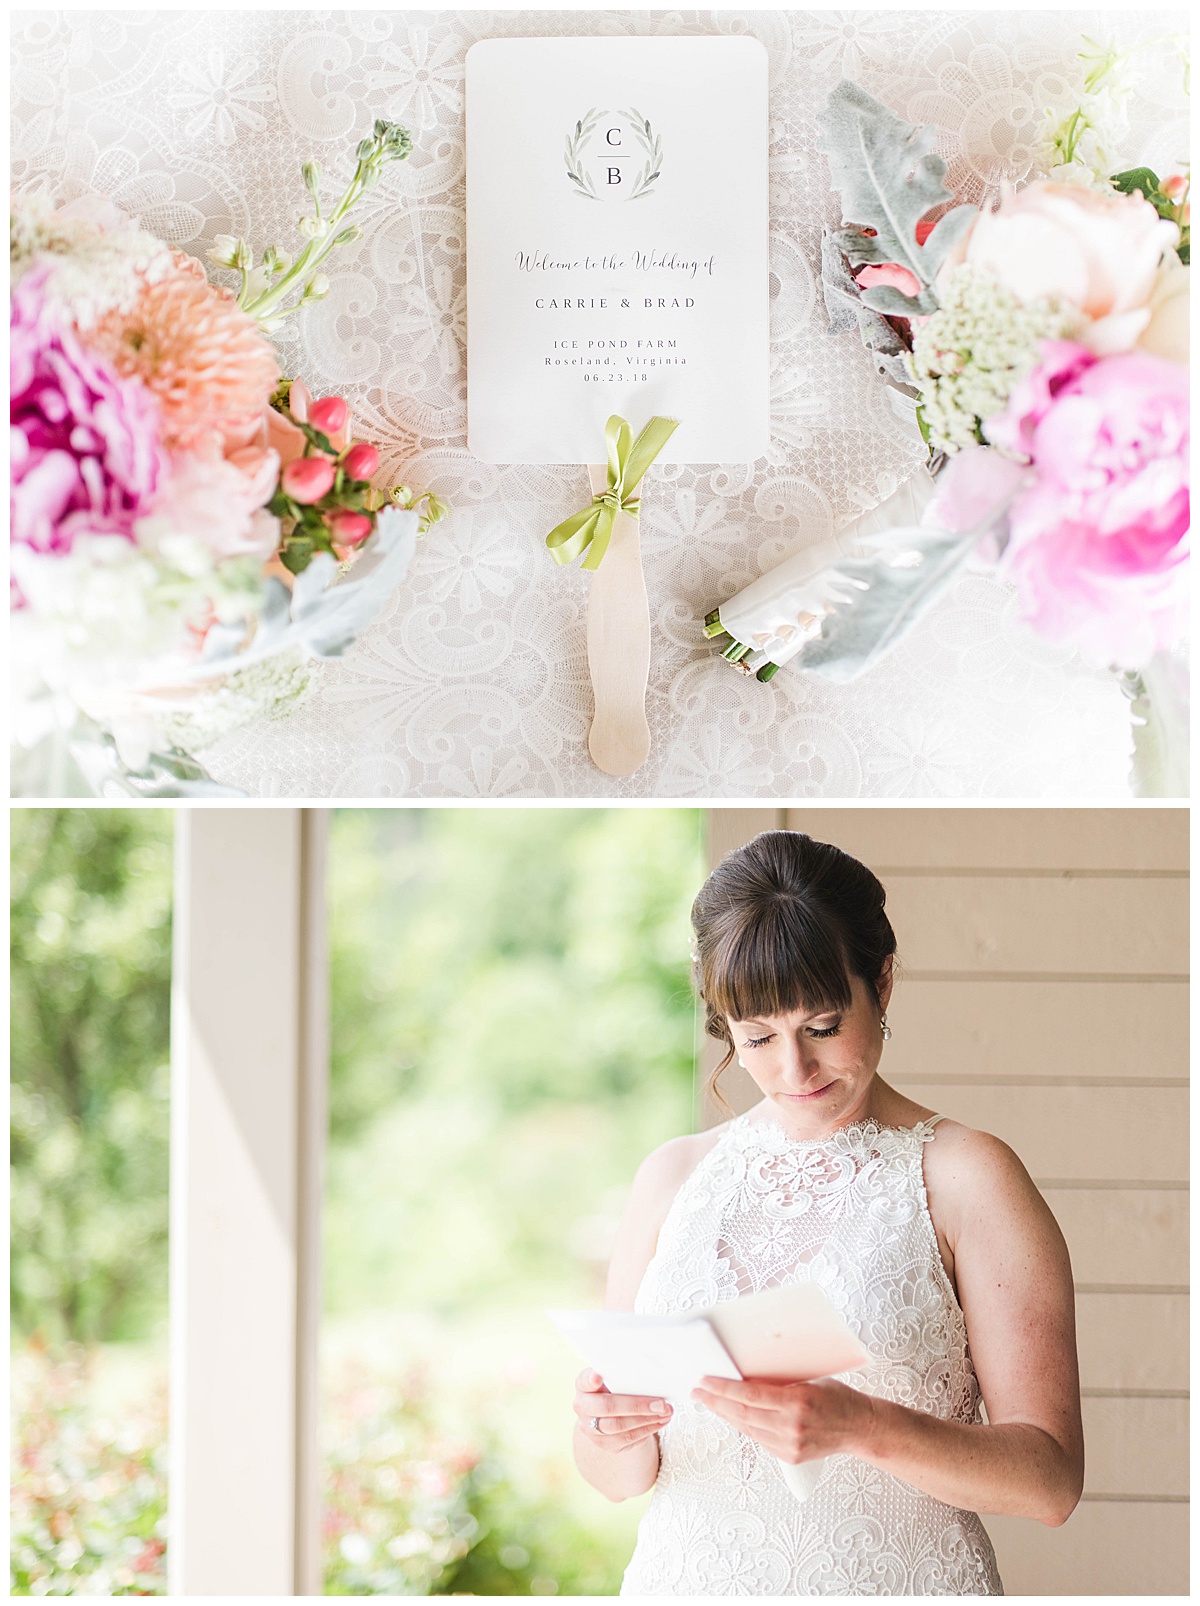 Rustic Charlottesville Farm Wedding: Invitations, Peach and Pink Floral Arrangements, and Bride's Portrait